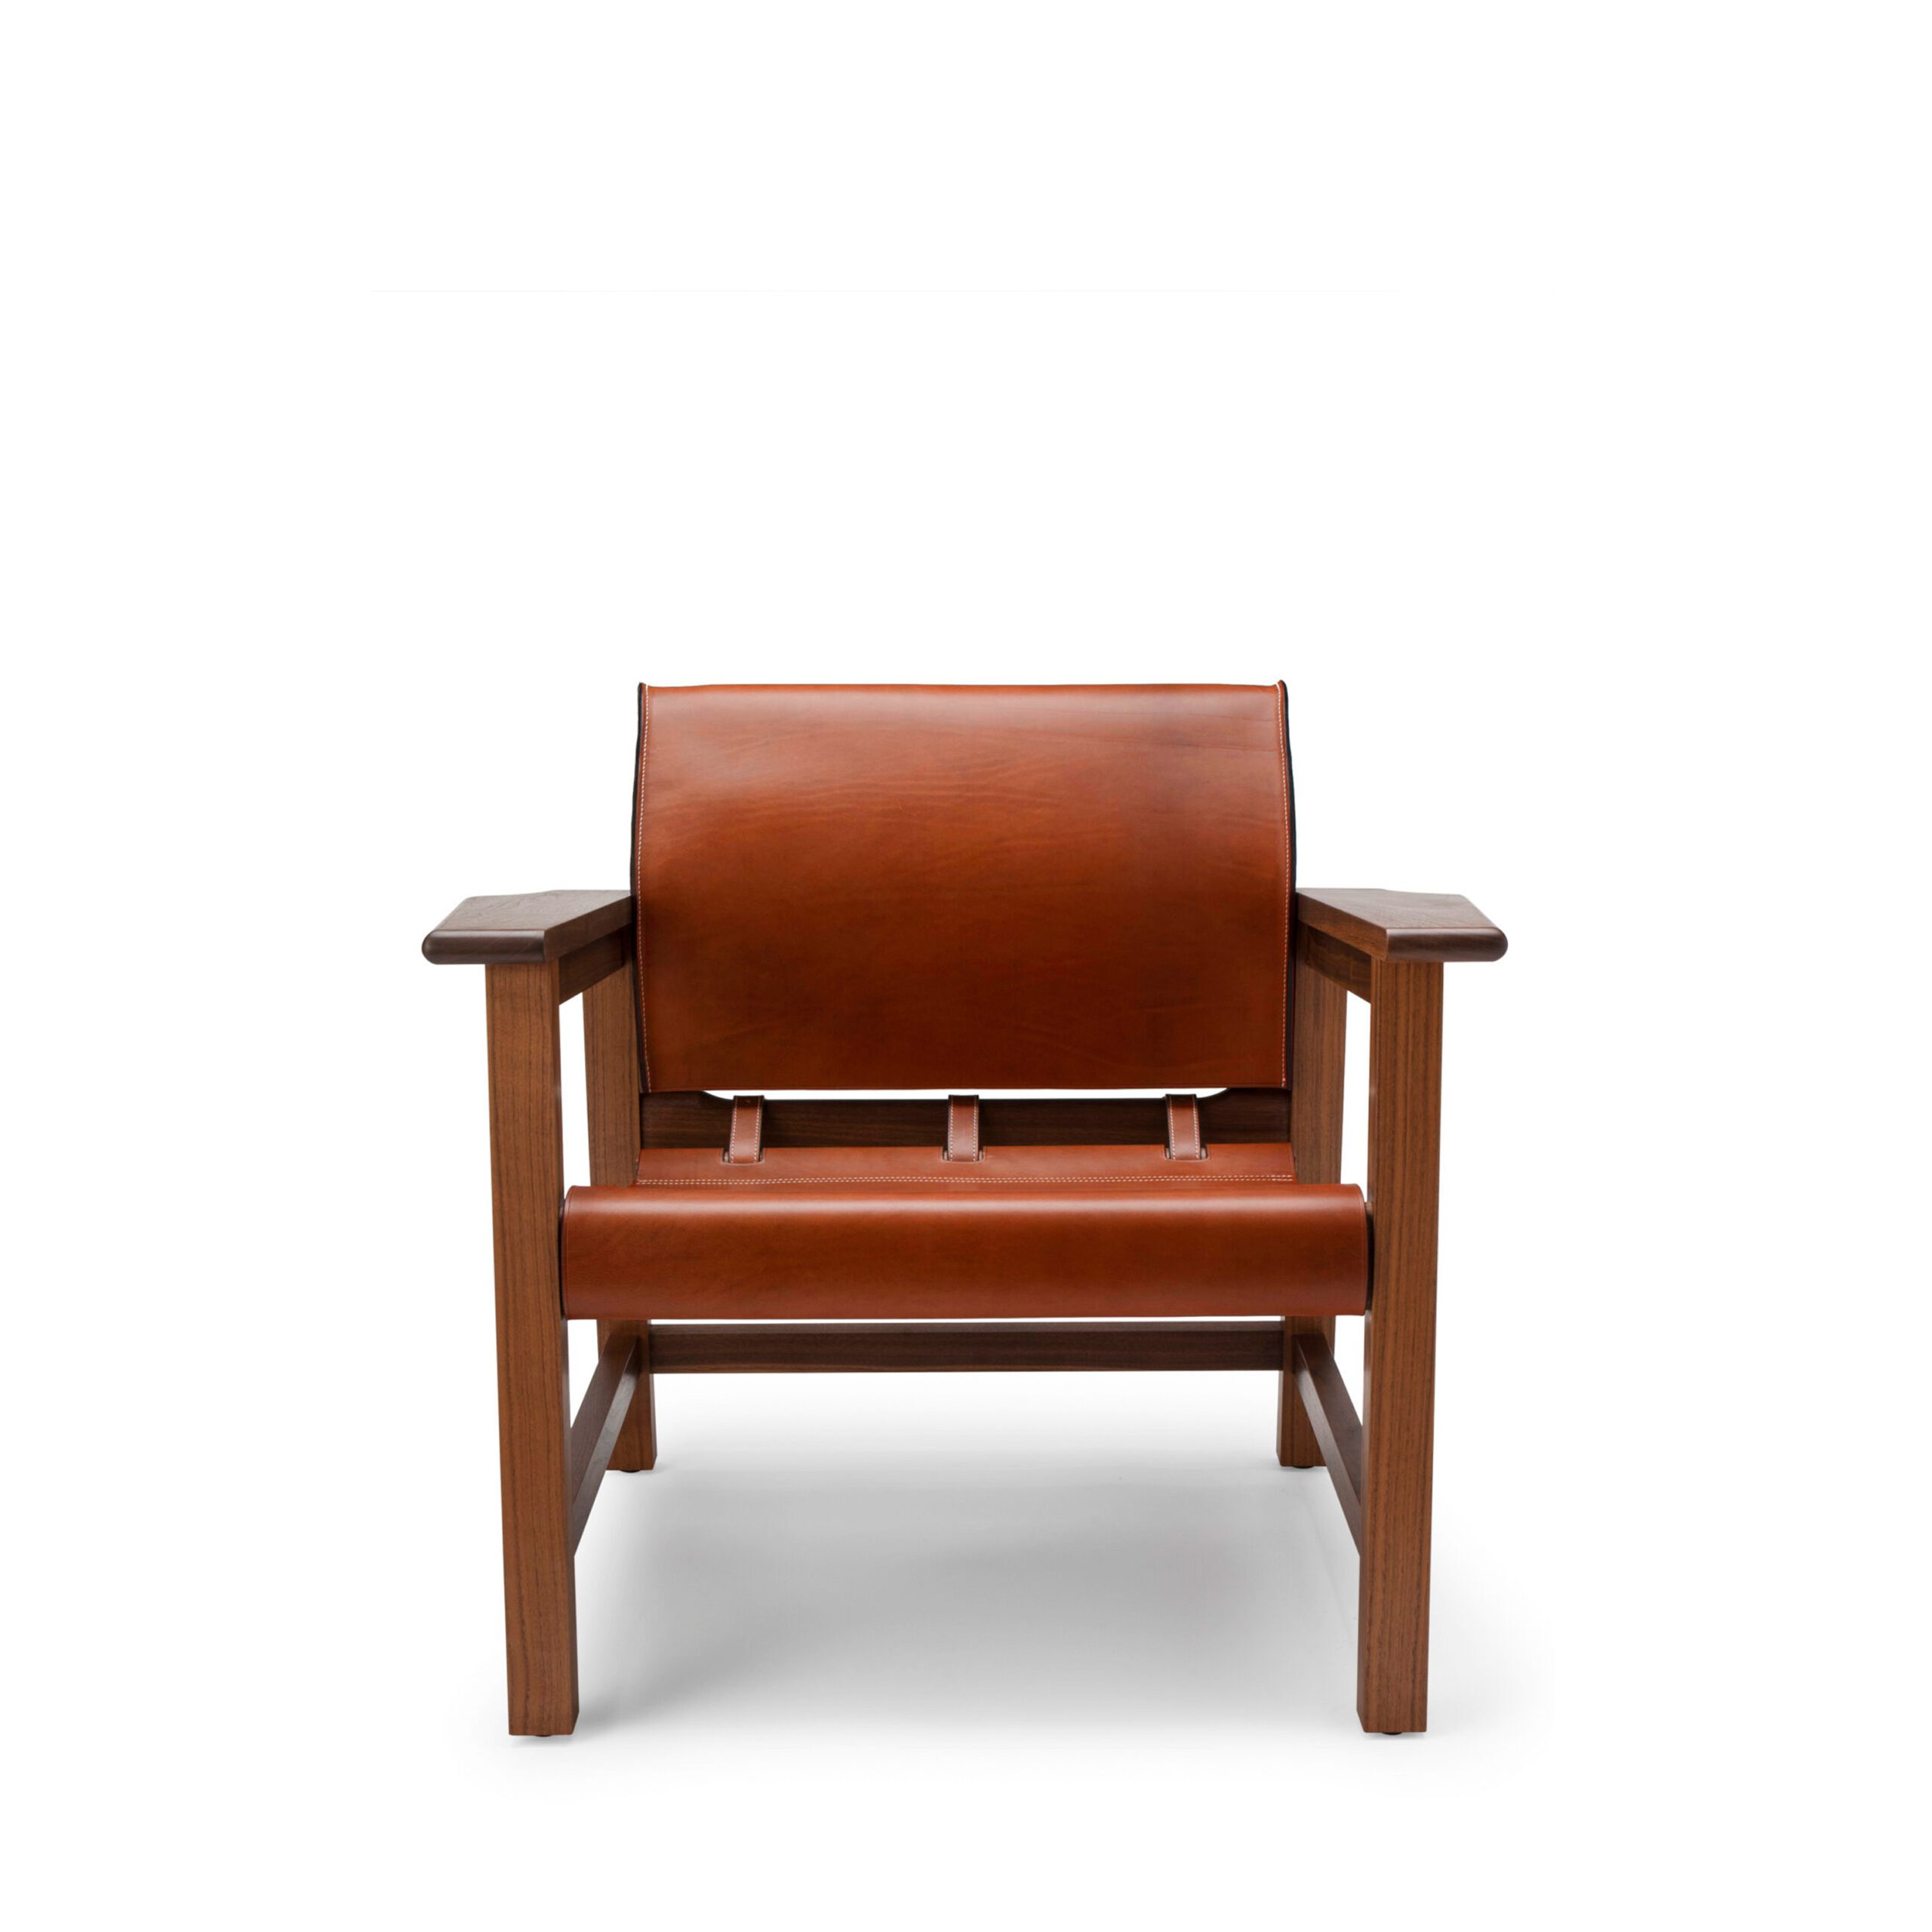 The Saddle Up Chair - Shown here in natural oiled walnut with tan saddle leather seat and back, featuring solid brass harness buckles, escutcheon pins and contrast stitching.